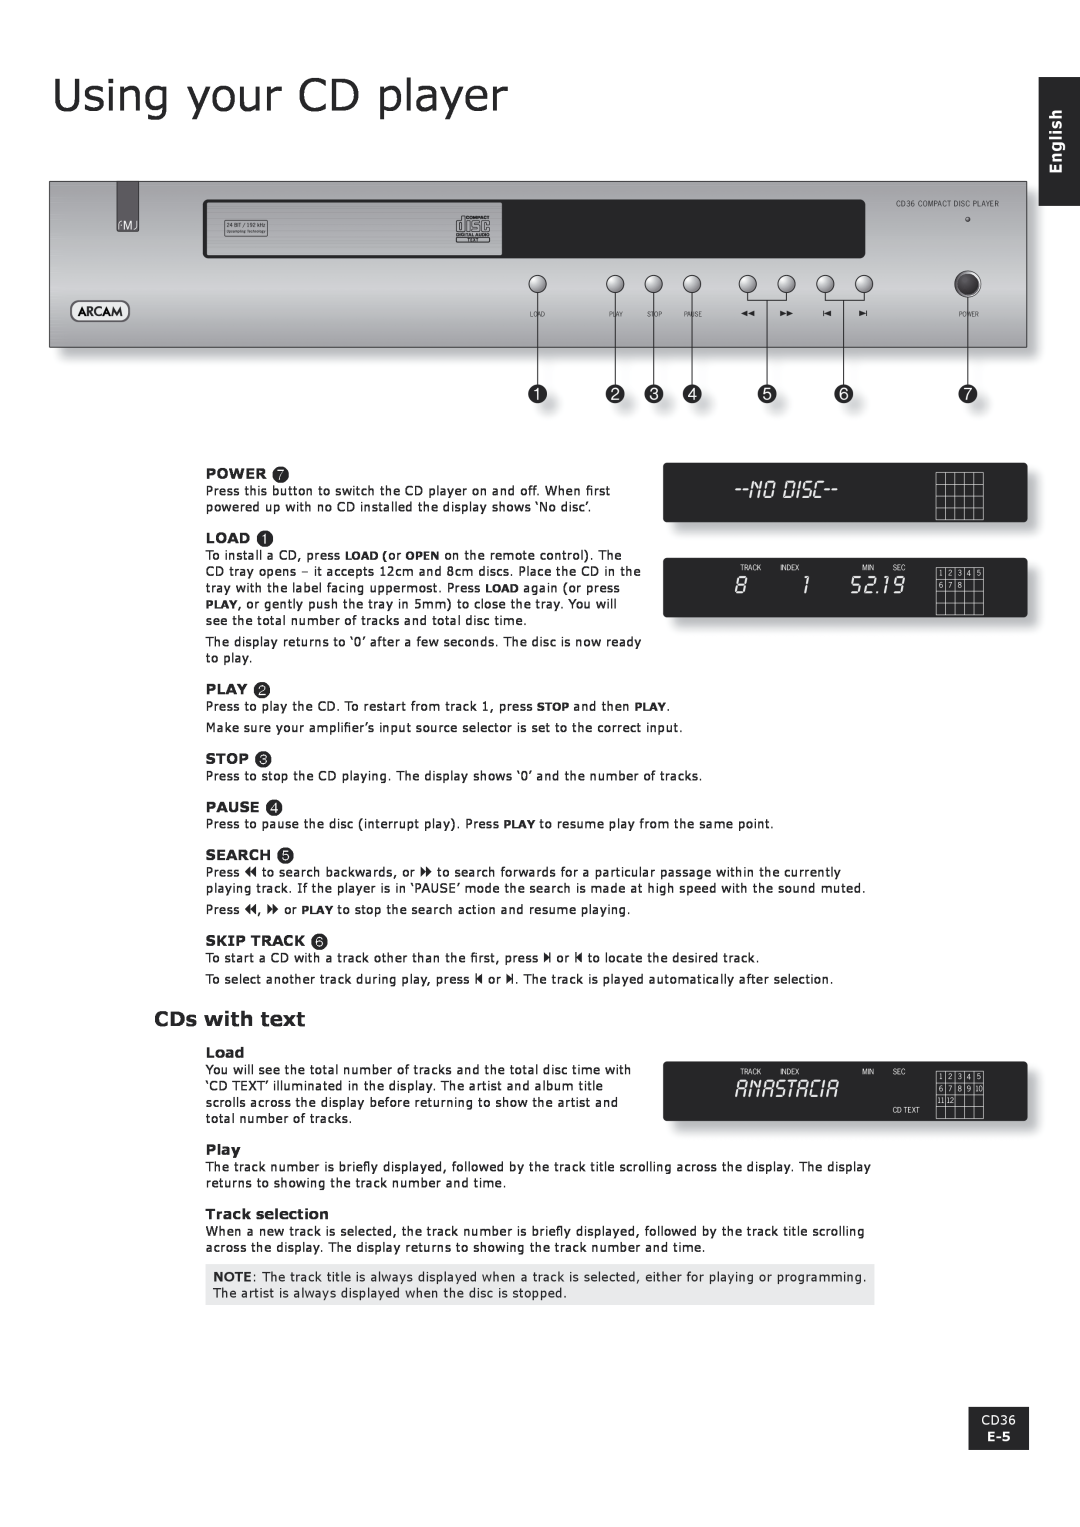 Arcam CD36 Using your CD player, CDs with text, Power, Load, Play, Stop, Pause, Search, Skip Track, Track selection, 52.19 